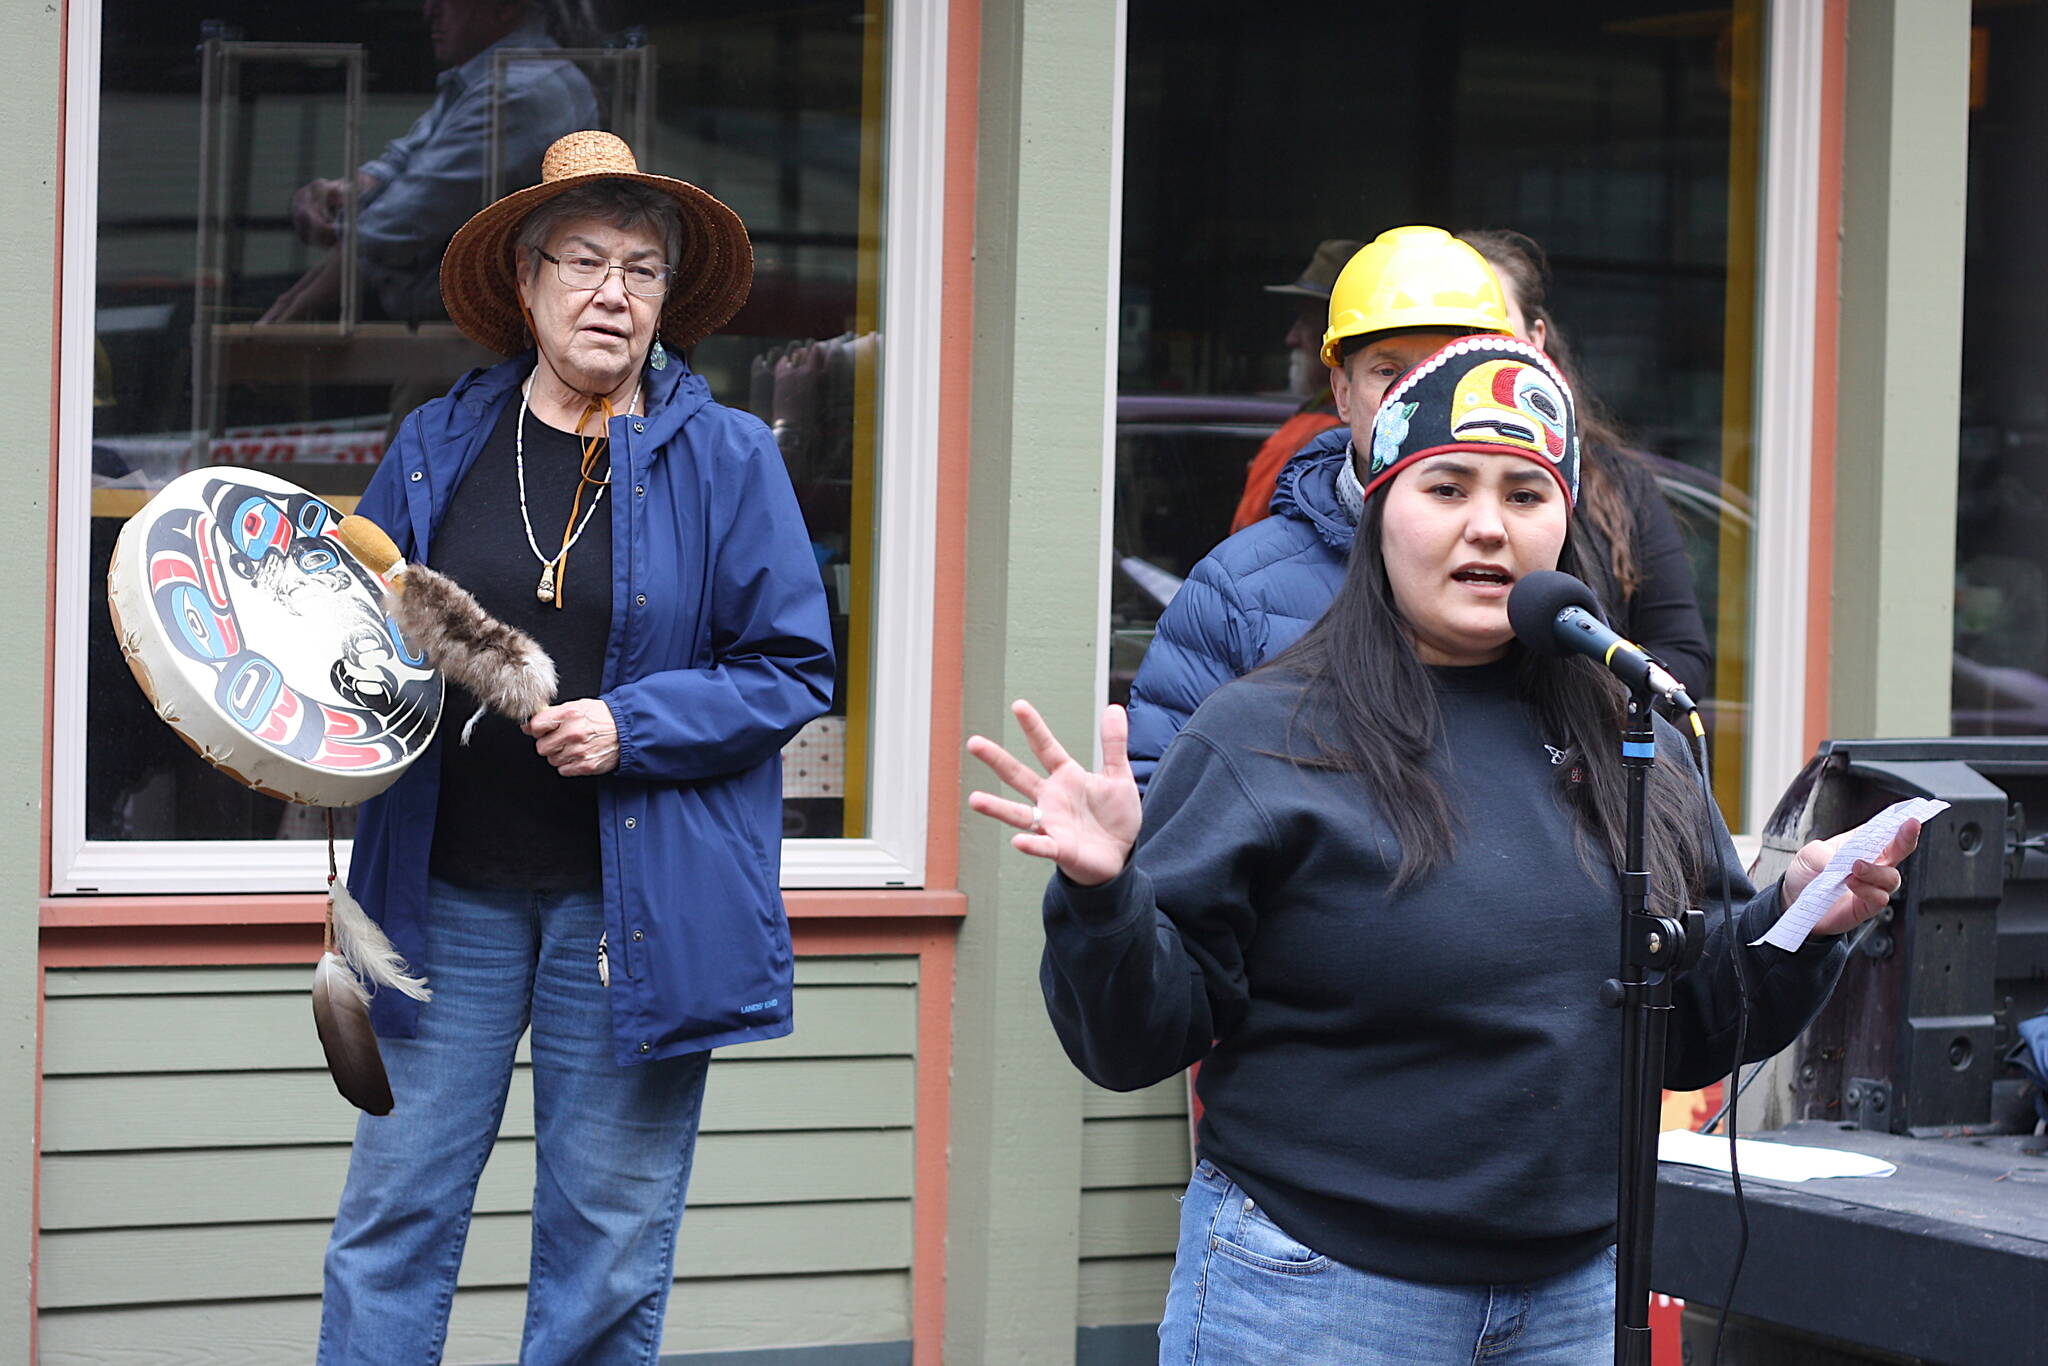 Mark Sabbatini / Juneau Empire
Rebekah Contreras, right, and Kashudoha Wanda Culp, both Hoonah residents, talk about the impacts of cruise ship tourism and other activities that are having climate and environmental impacts in their community during a climate change protest in downtown Juneau at midday Tuesday.